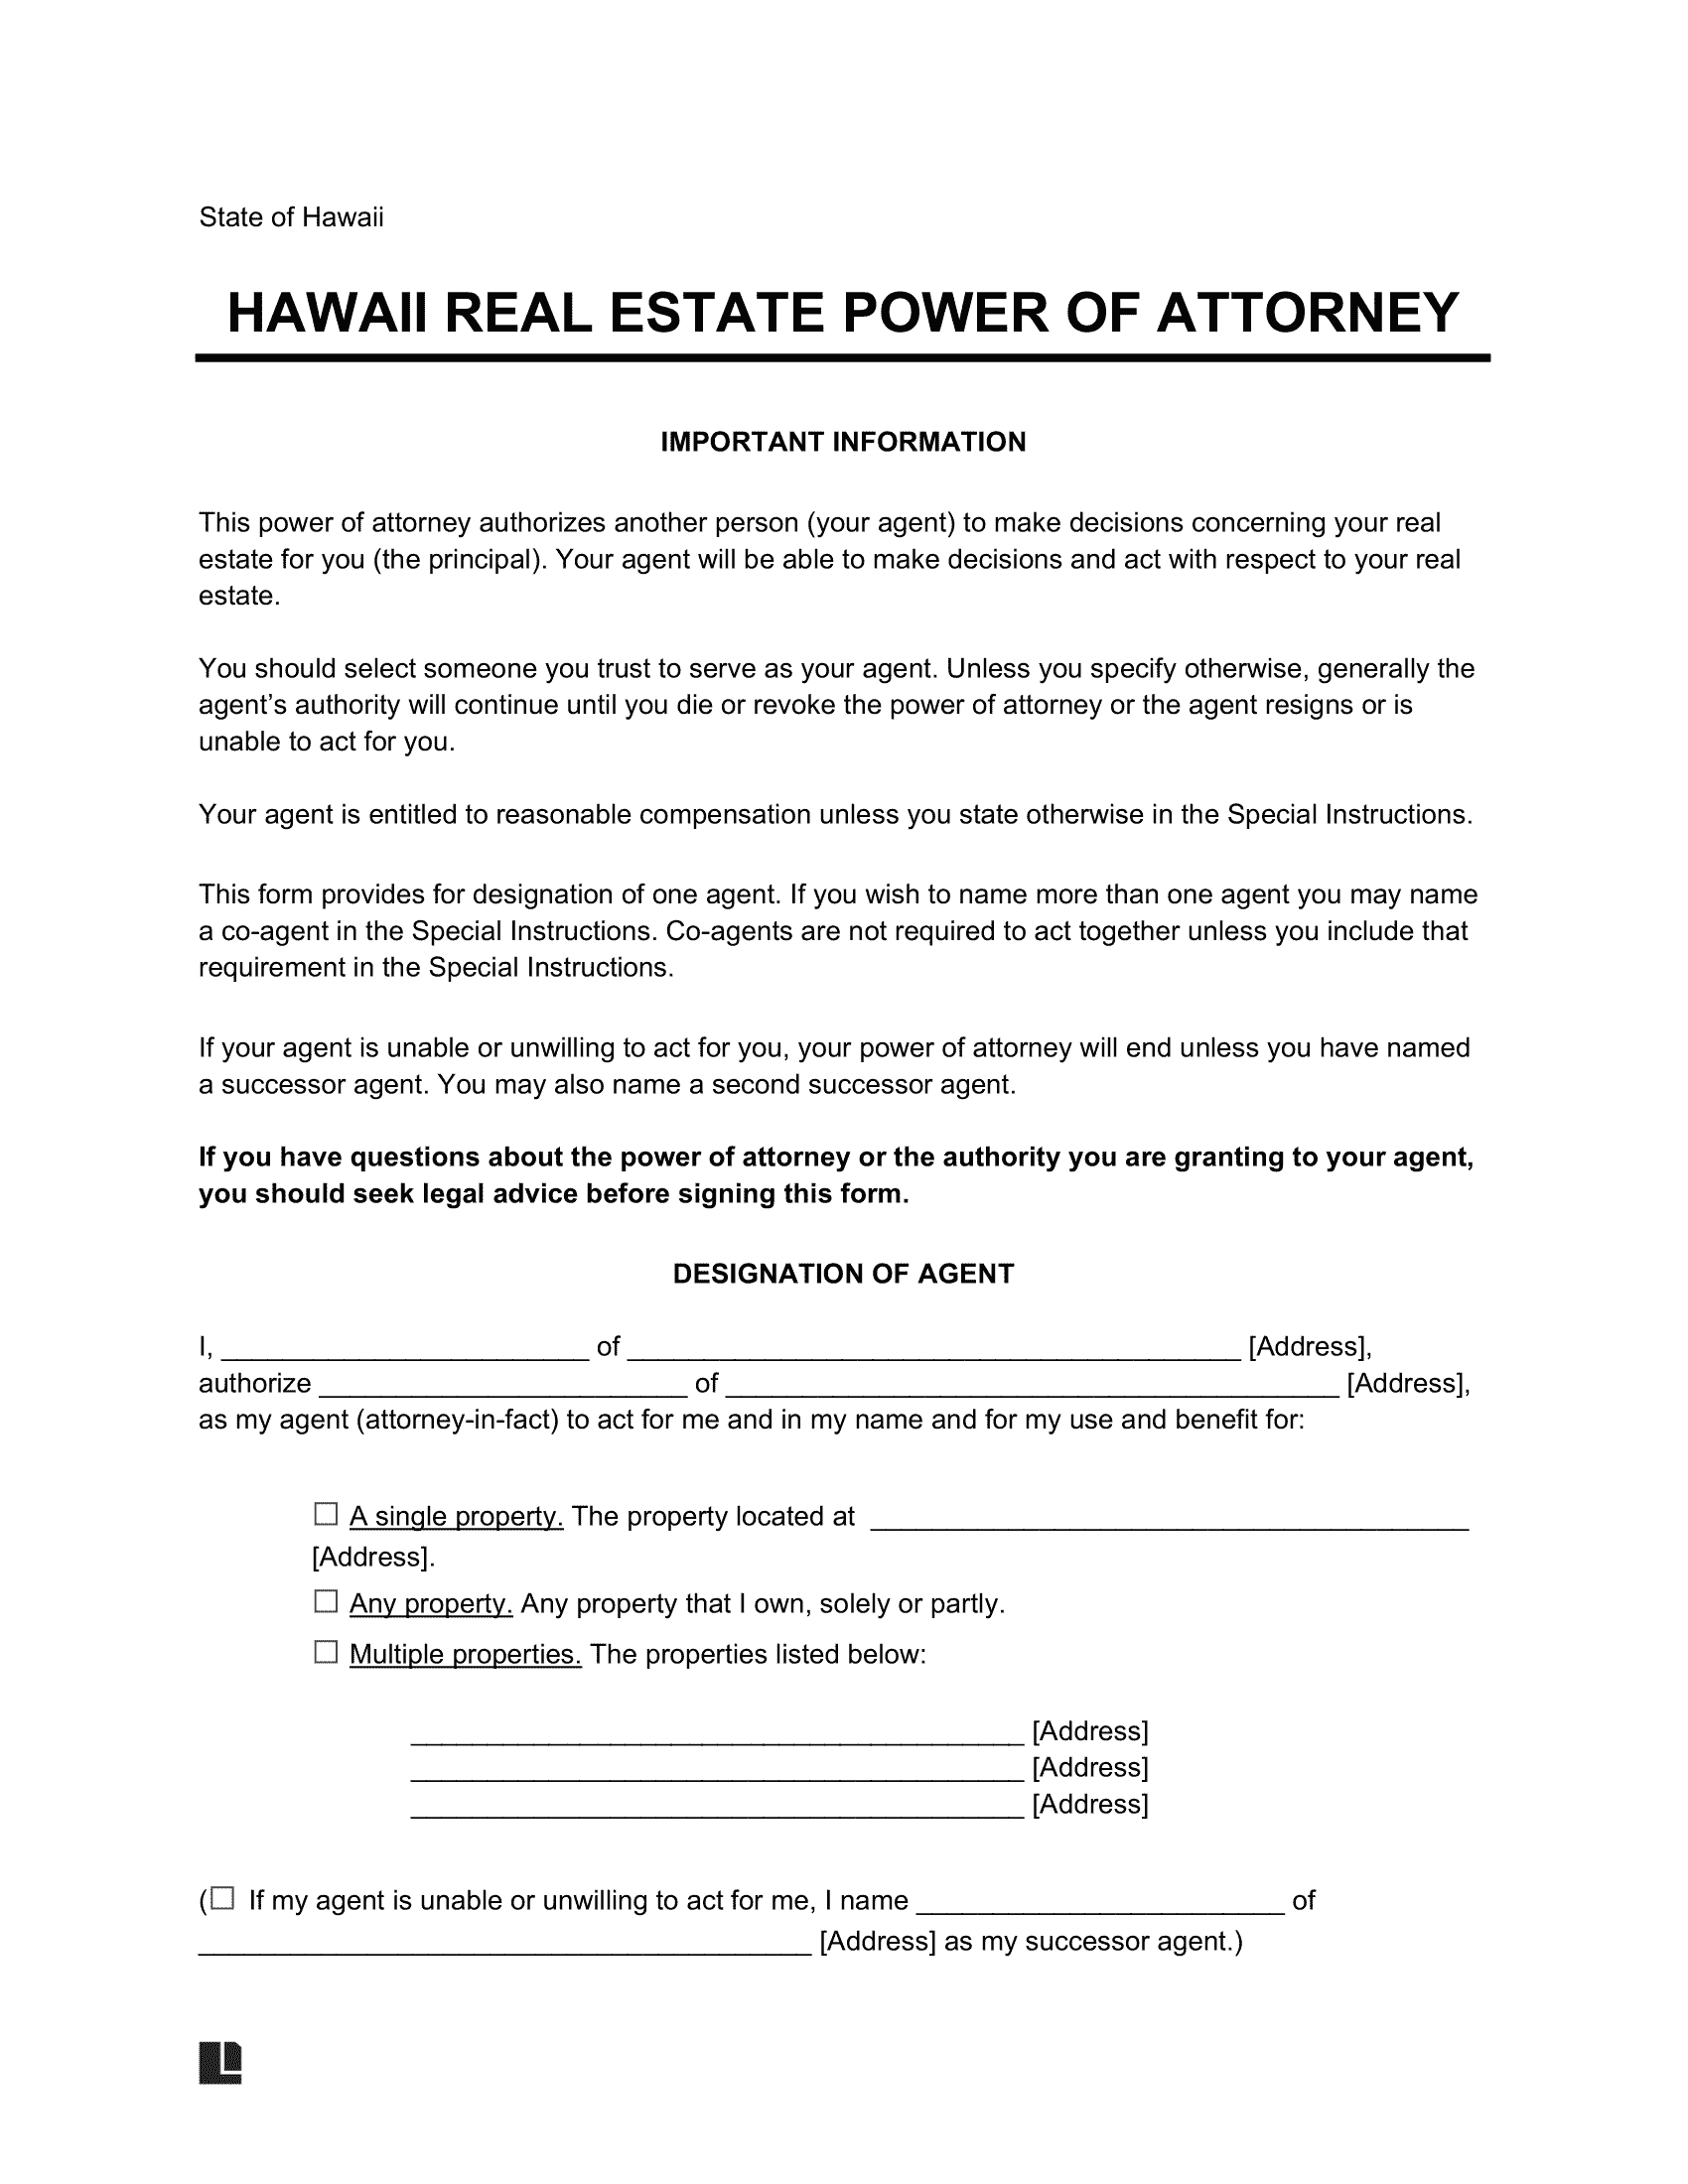 Hawaii Real Estate Power of Attorney Form